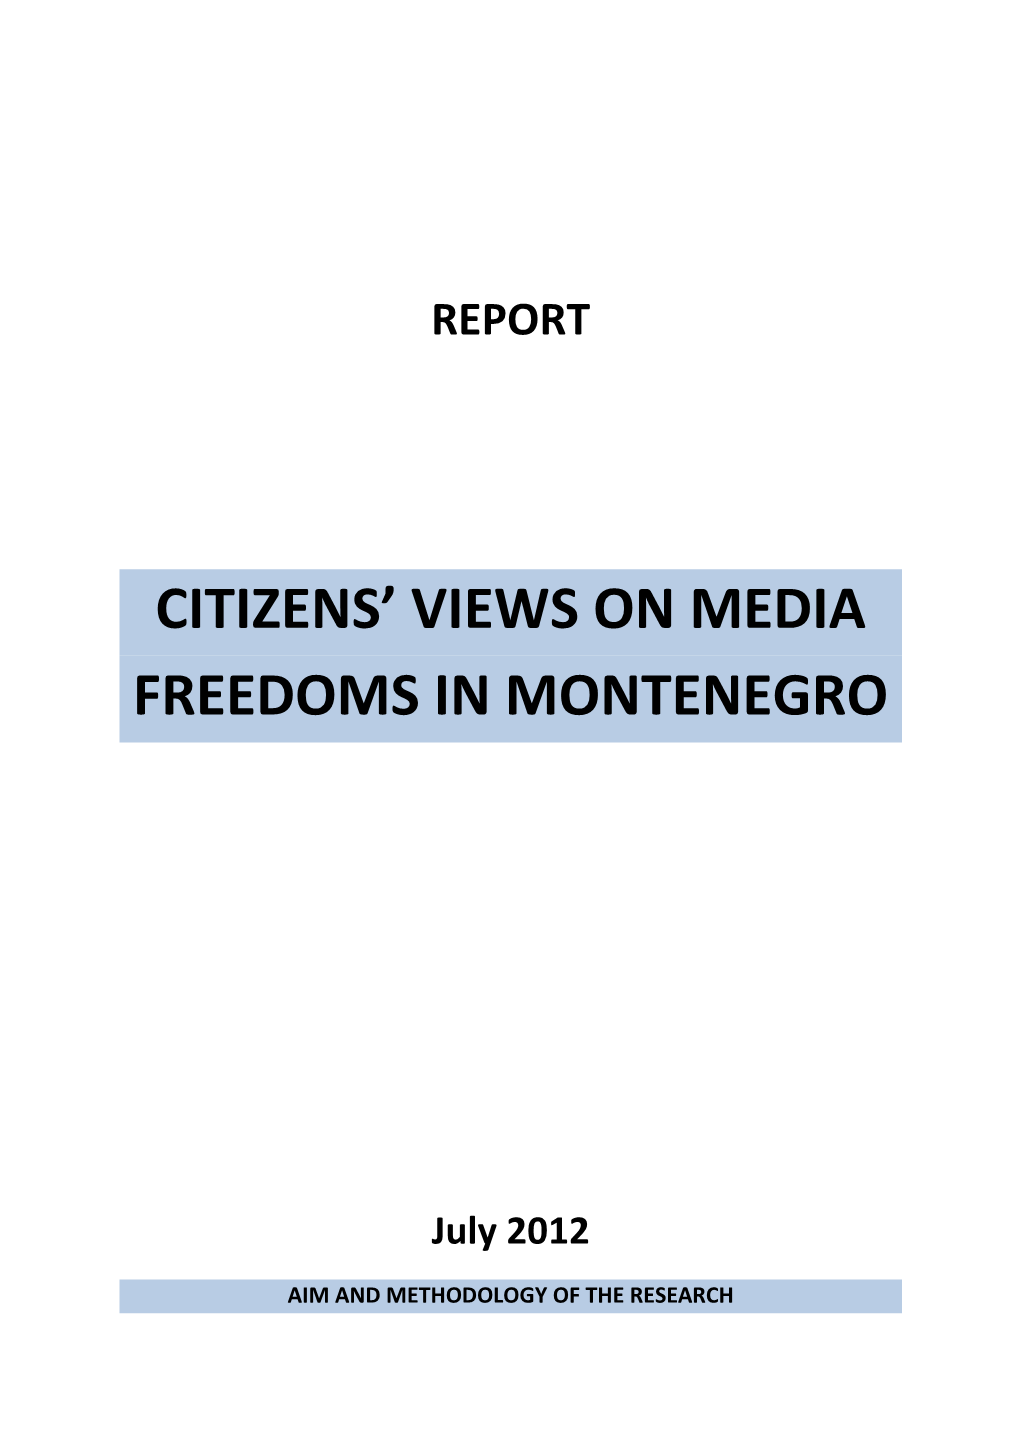 Citizens' Views on Media Freedoms in Montenegro